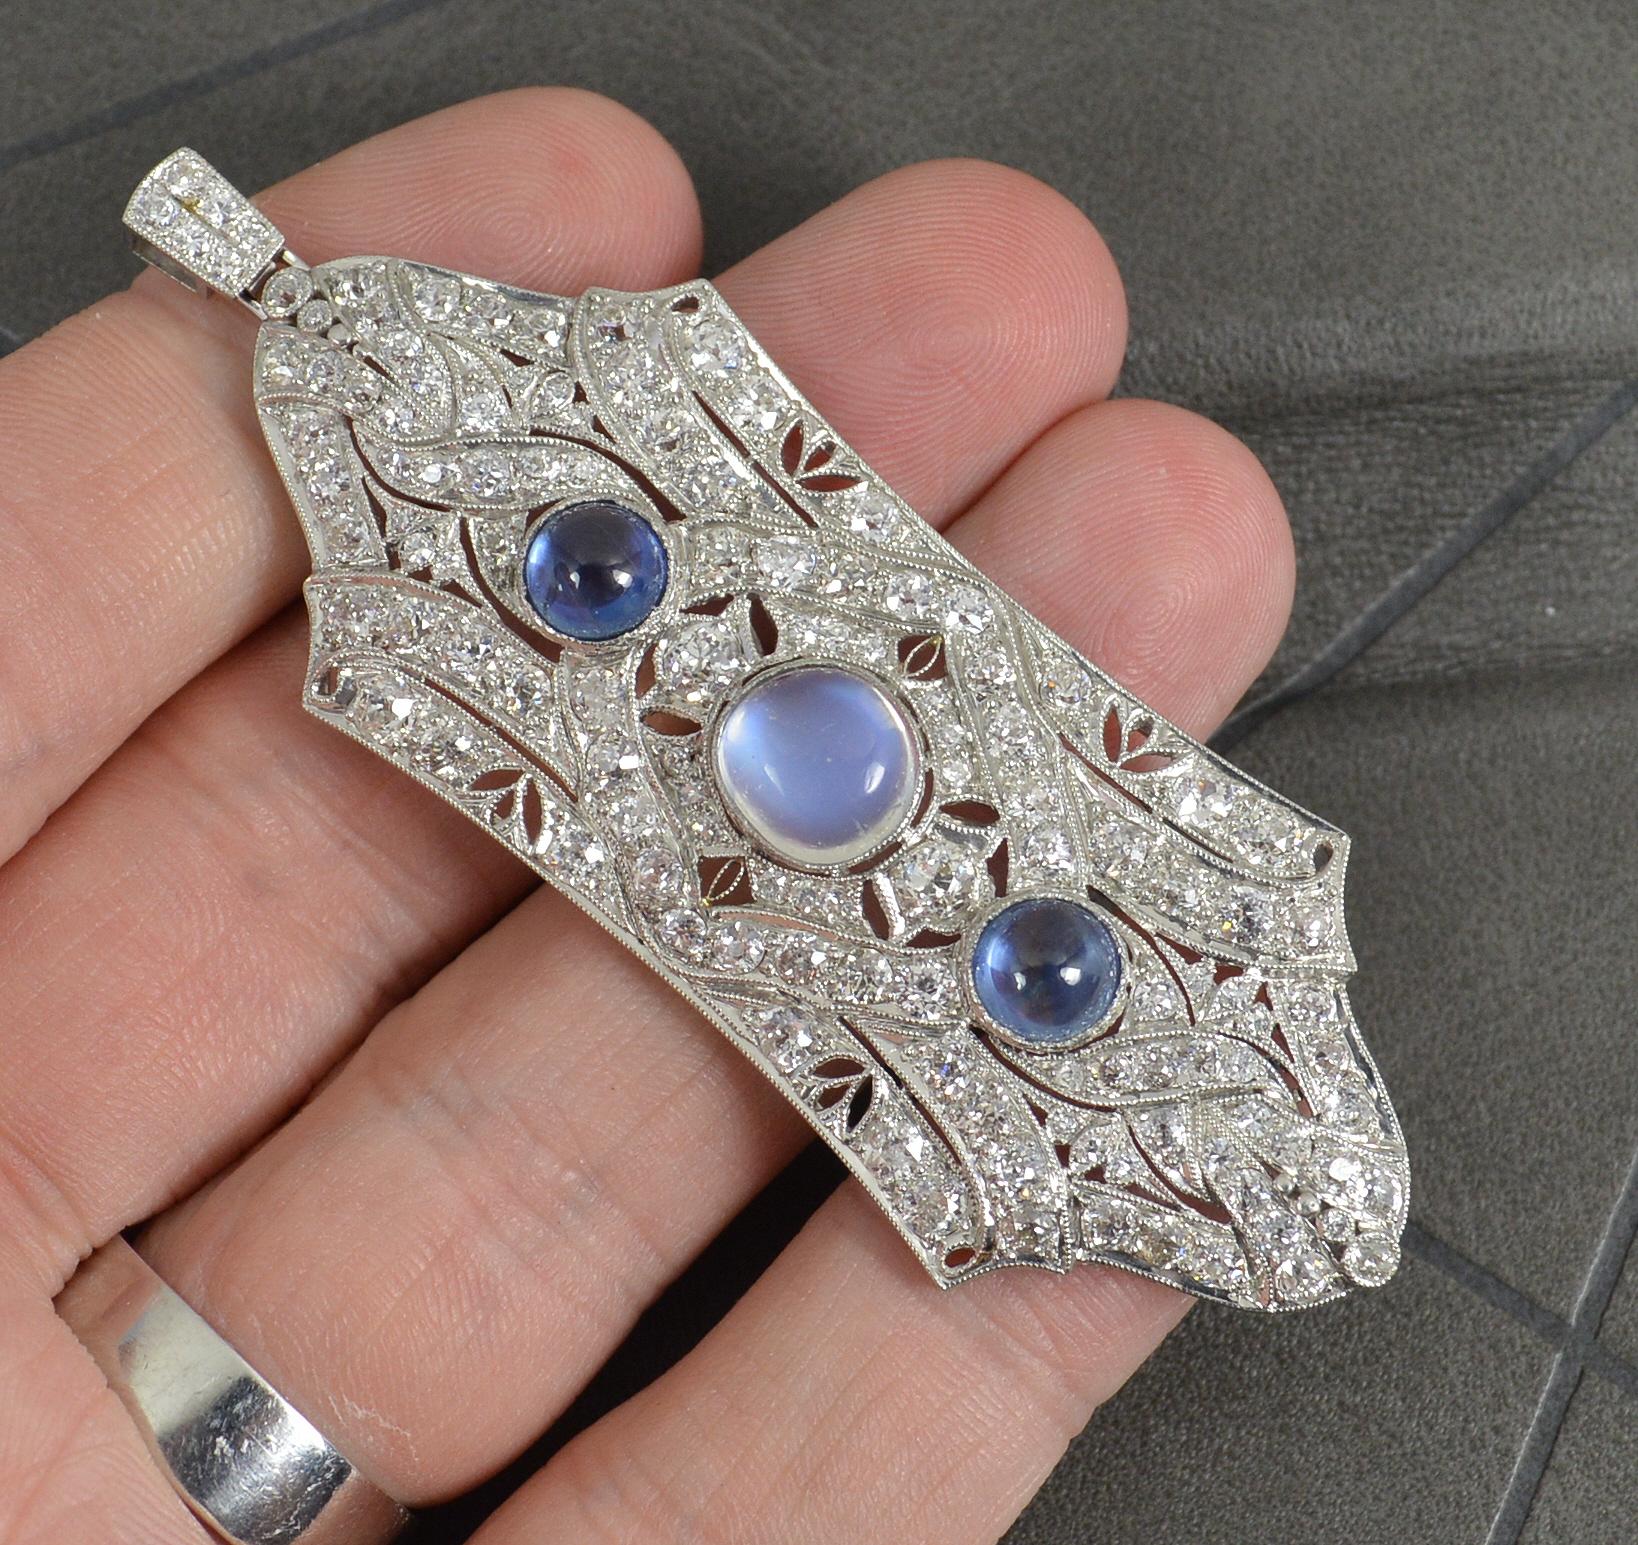 A fantastic Art Deco period pendant. Circa 1920/30.
Solid platinum example.
Designed with a large blue moonstone to centre with a sapphire cabochon above and below with many old cut diamonds set throughout the piece.
Minimum of 3.75 carats of